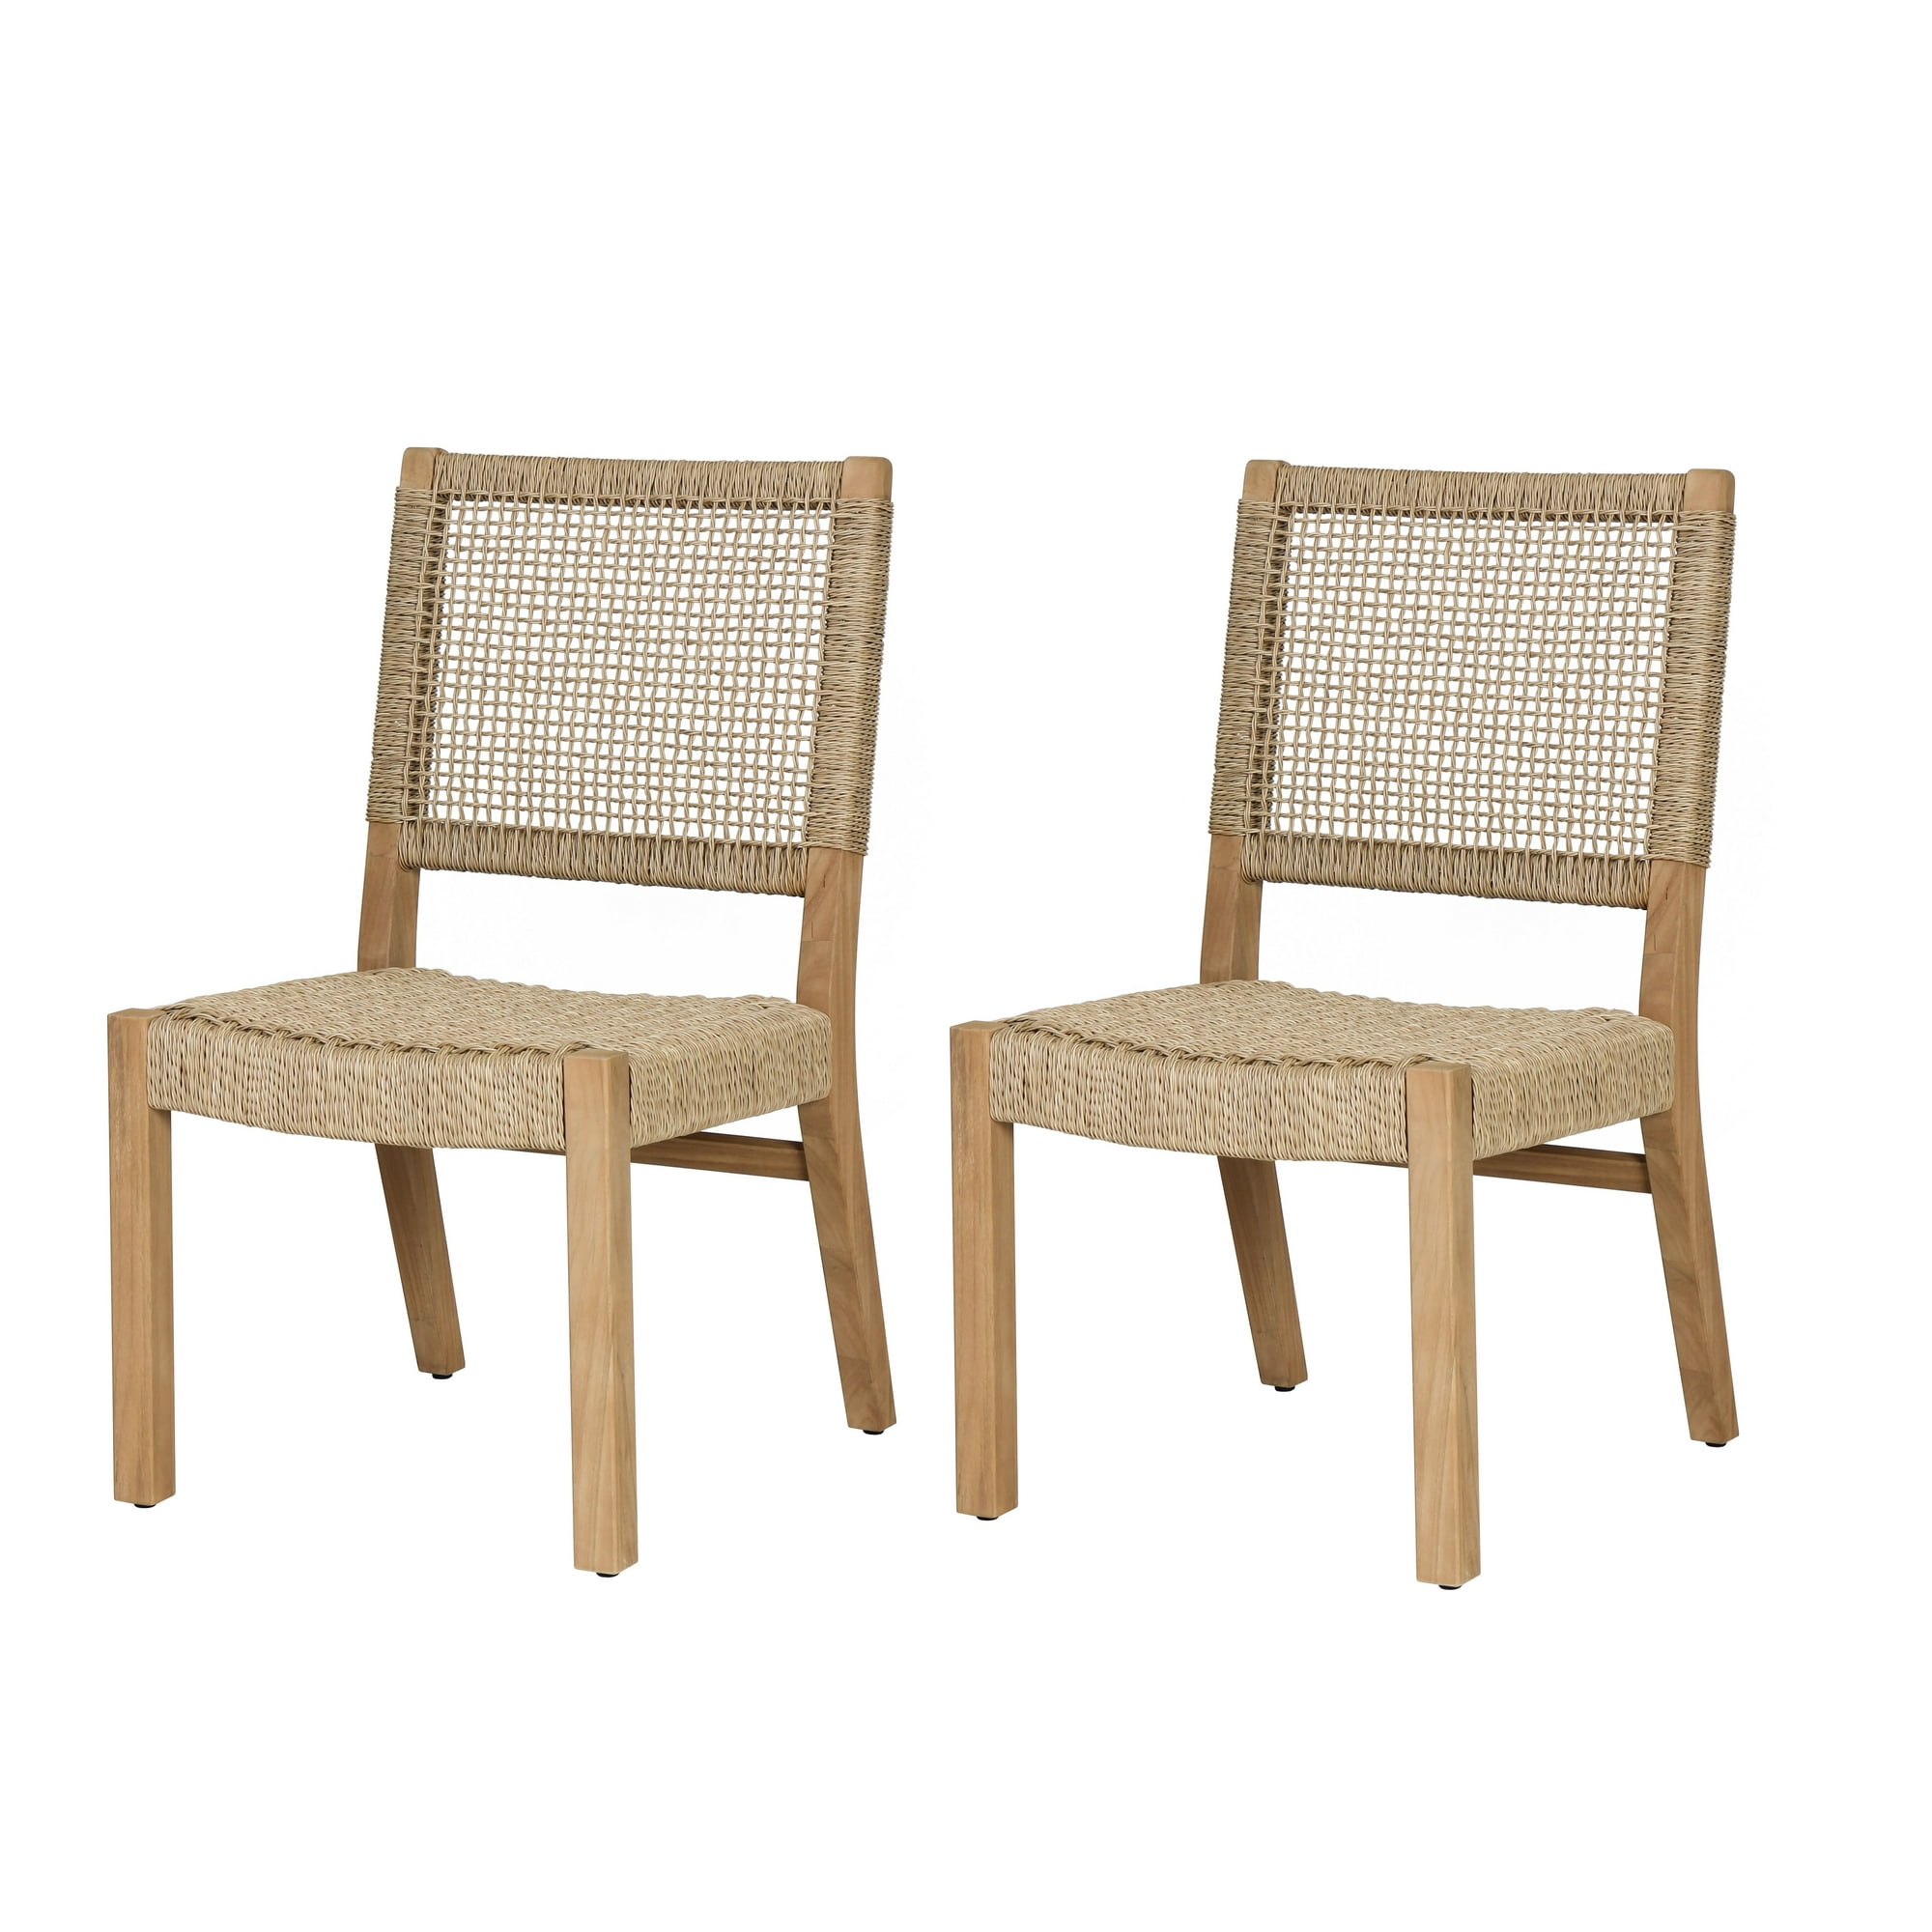 Better Homes & Gardens by Dave & Jenny Marrs Ashbrook 2-Pack Teak & Wicker Dining Chairs